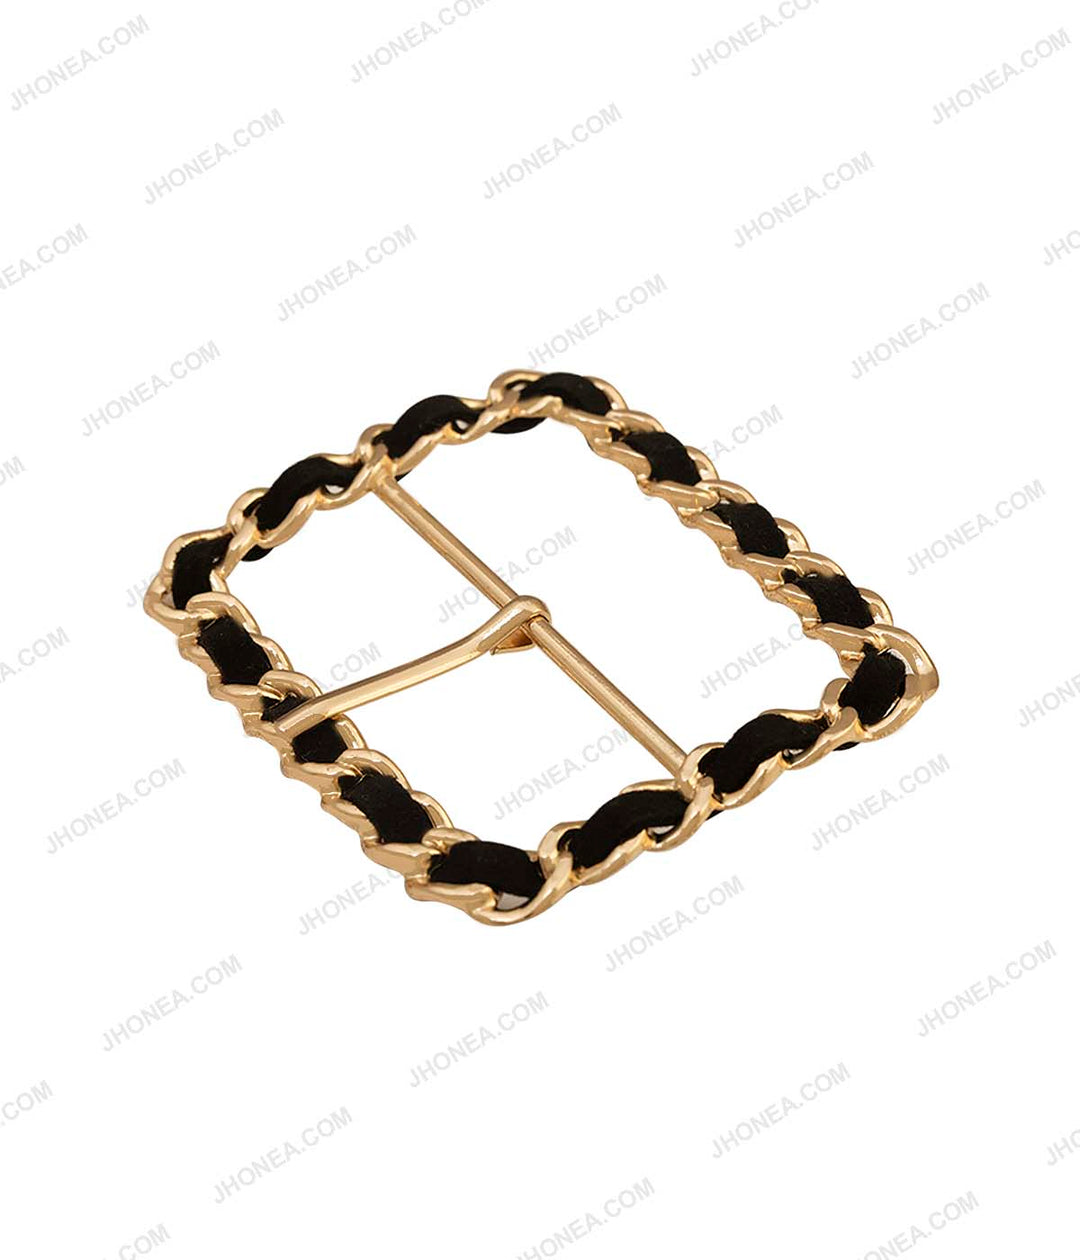 Broad Rectangle Frame Shiny Gold with Black Prong Buckle